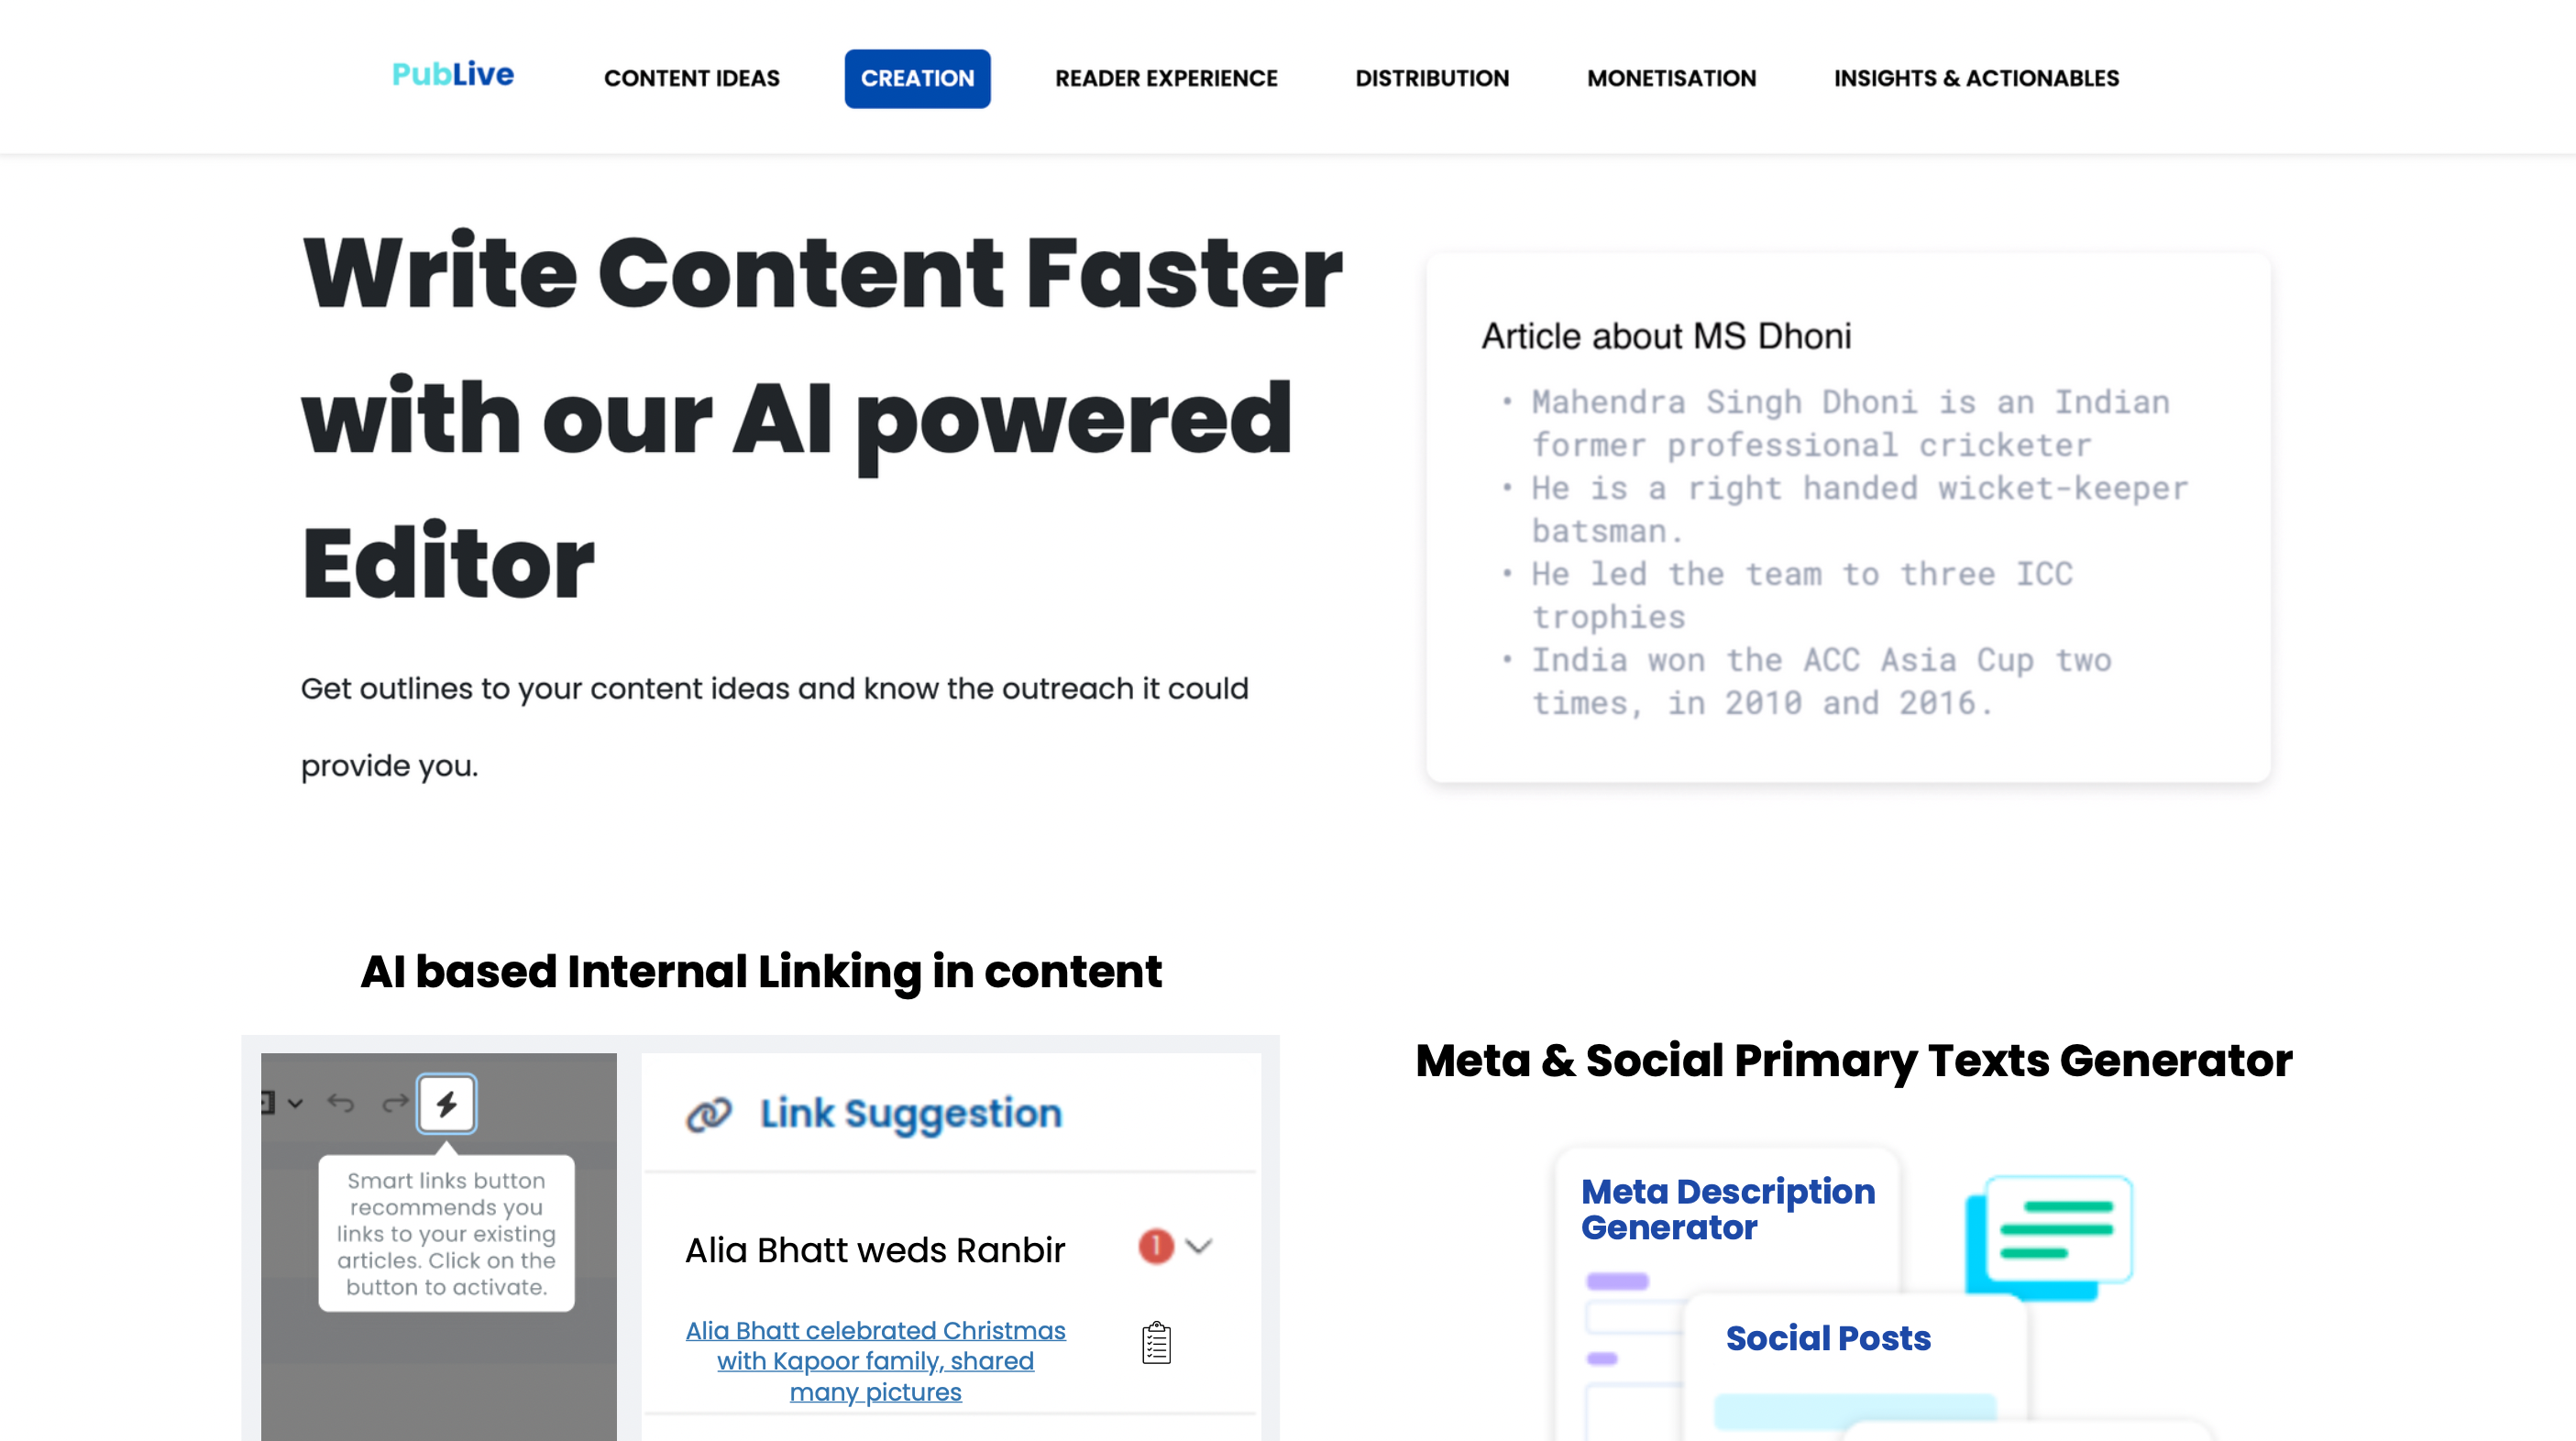 Write Content Faster with our AI powered editor